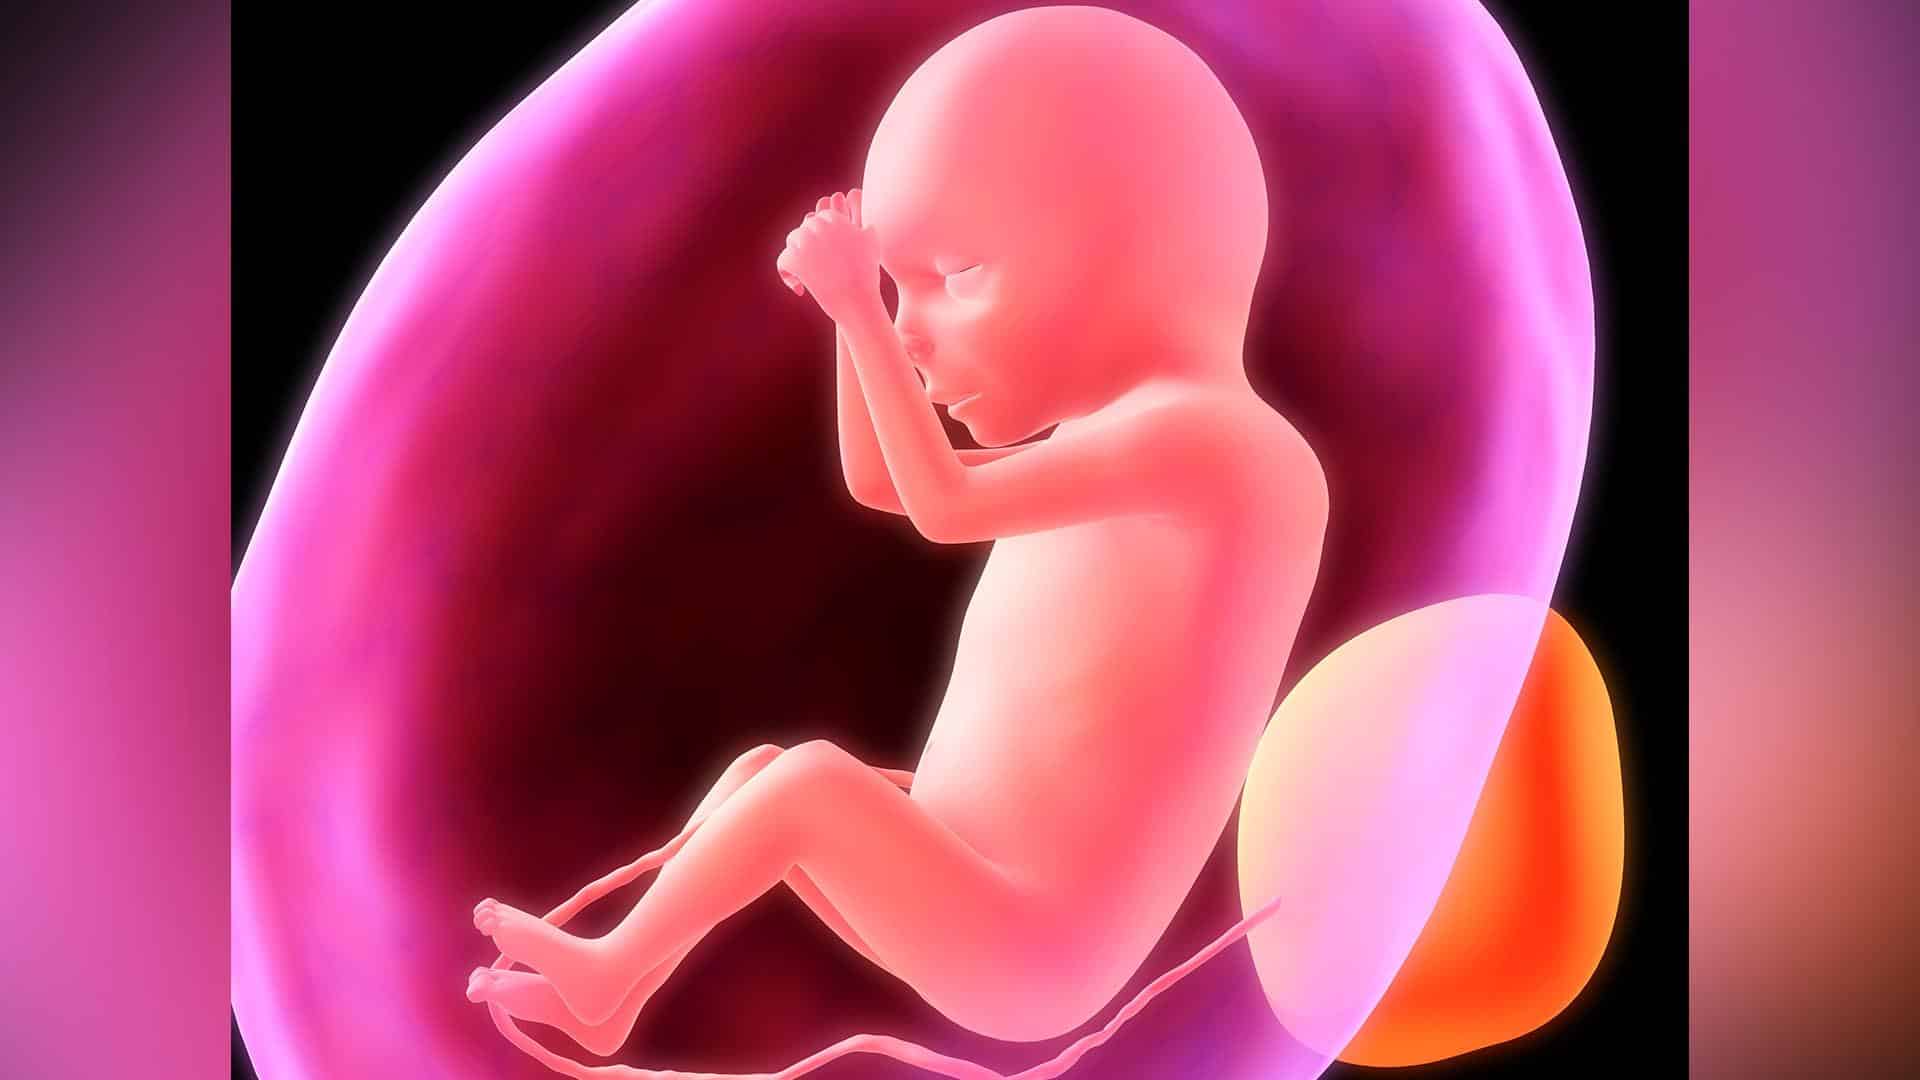 Democrats Defeat Pro-Life Amendment, Vote to Force Americans to Fund Abortions